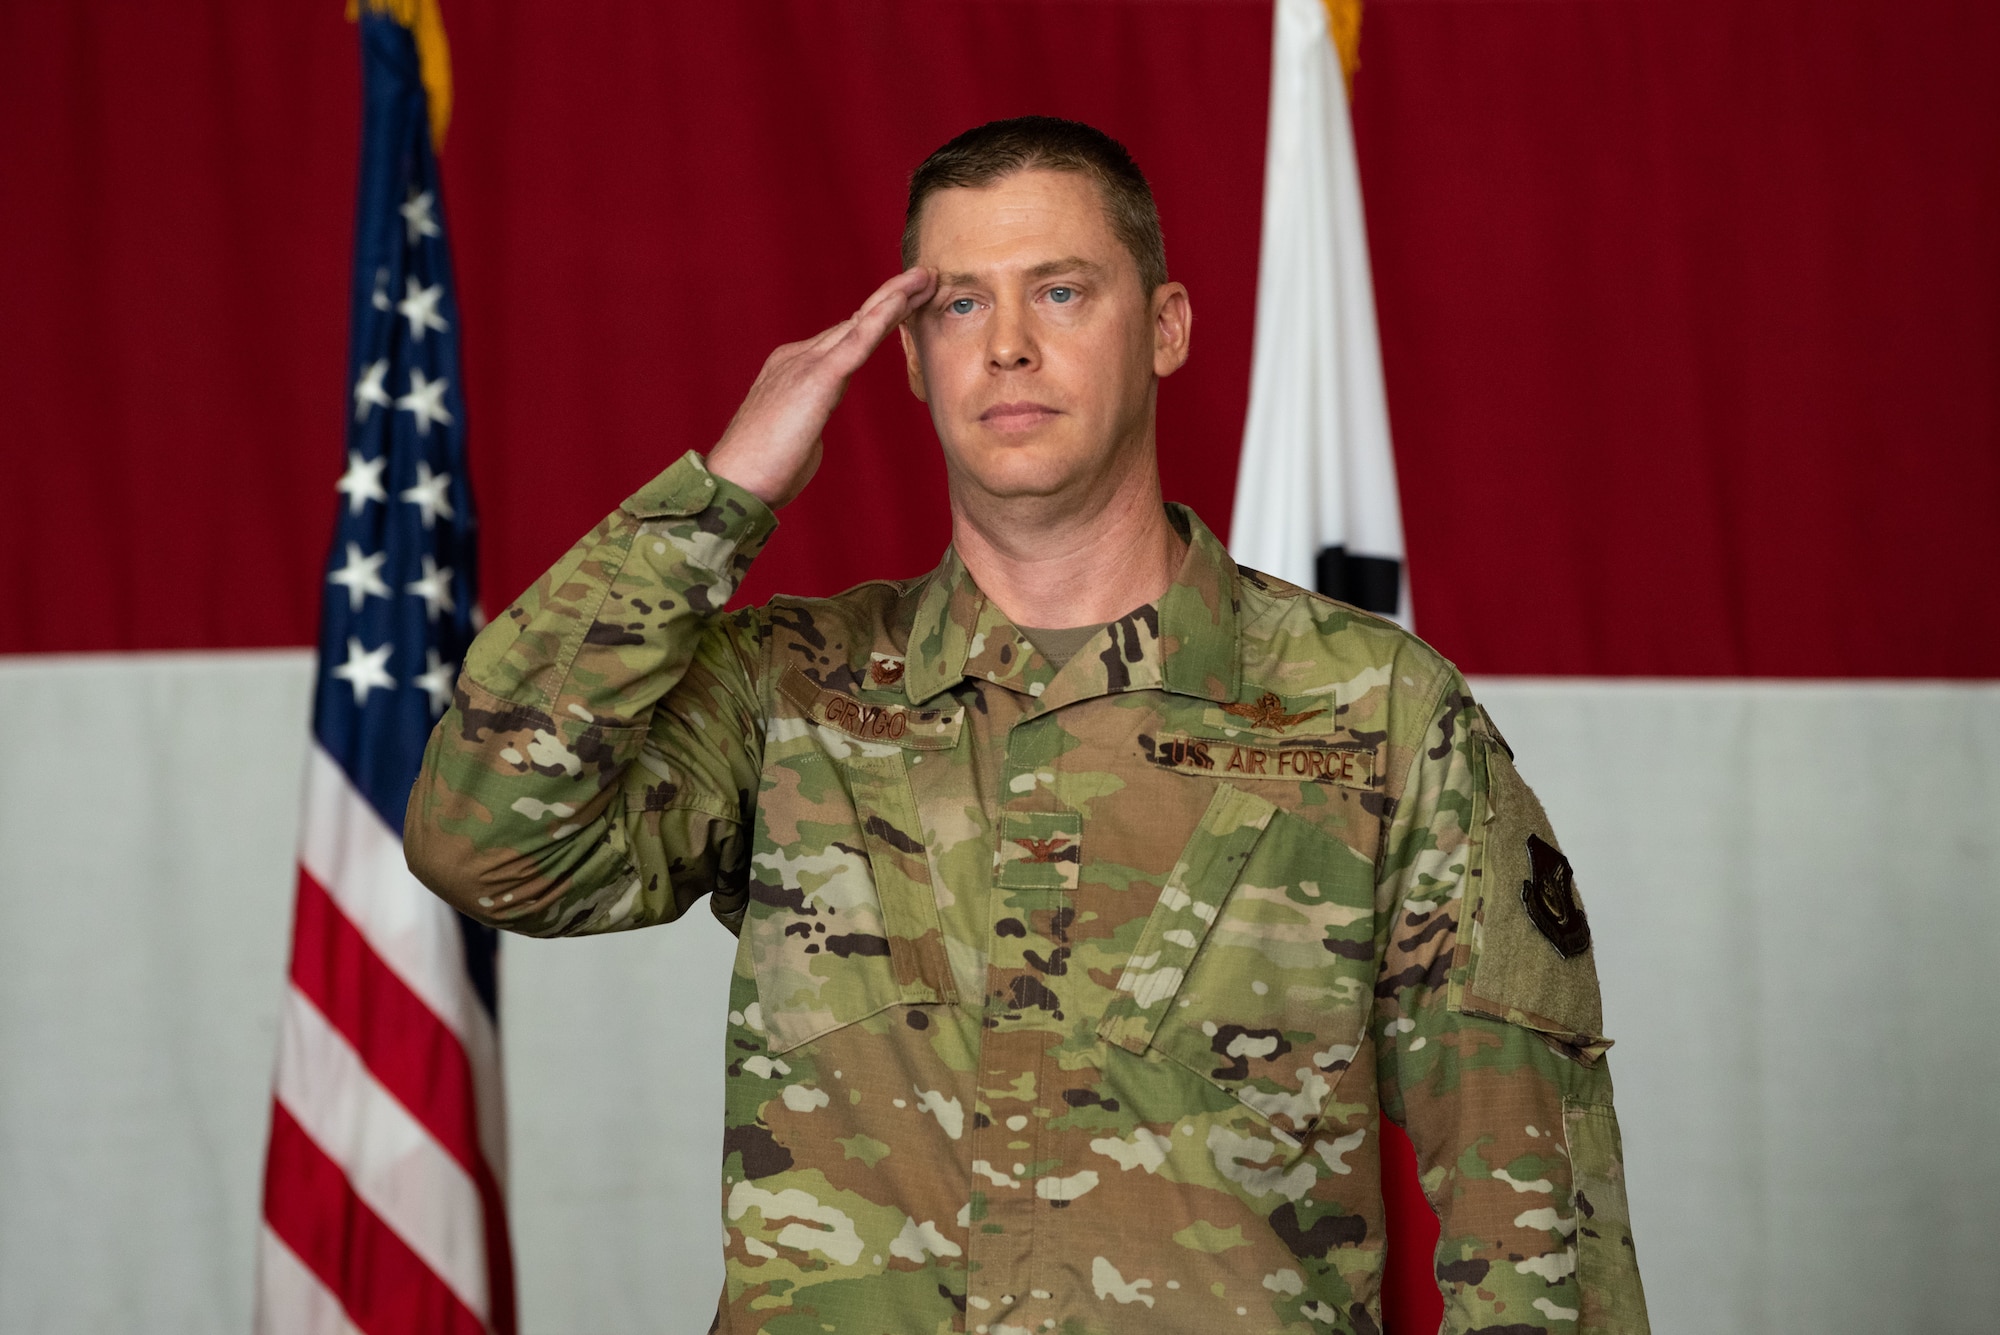 Col. Kyle Grygo, 51st Mission Support Group incoming commander, renders his first salute as commander during the 51st MSG change of command ceremony at Osan Air Base, Republic of Korea, July 13, 2022.